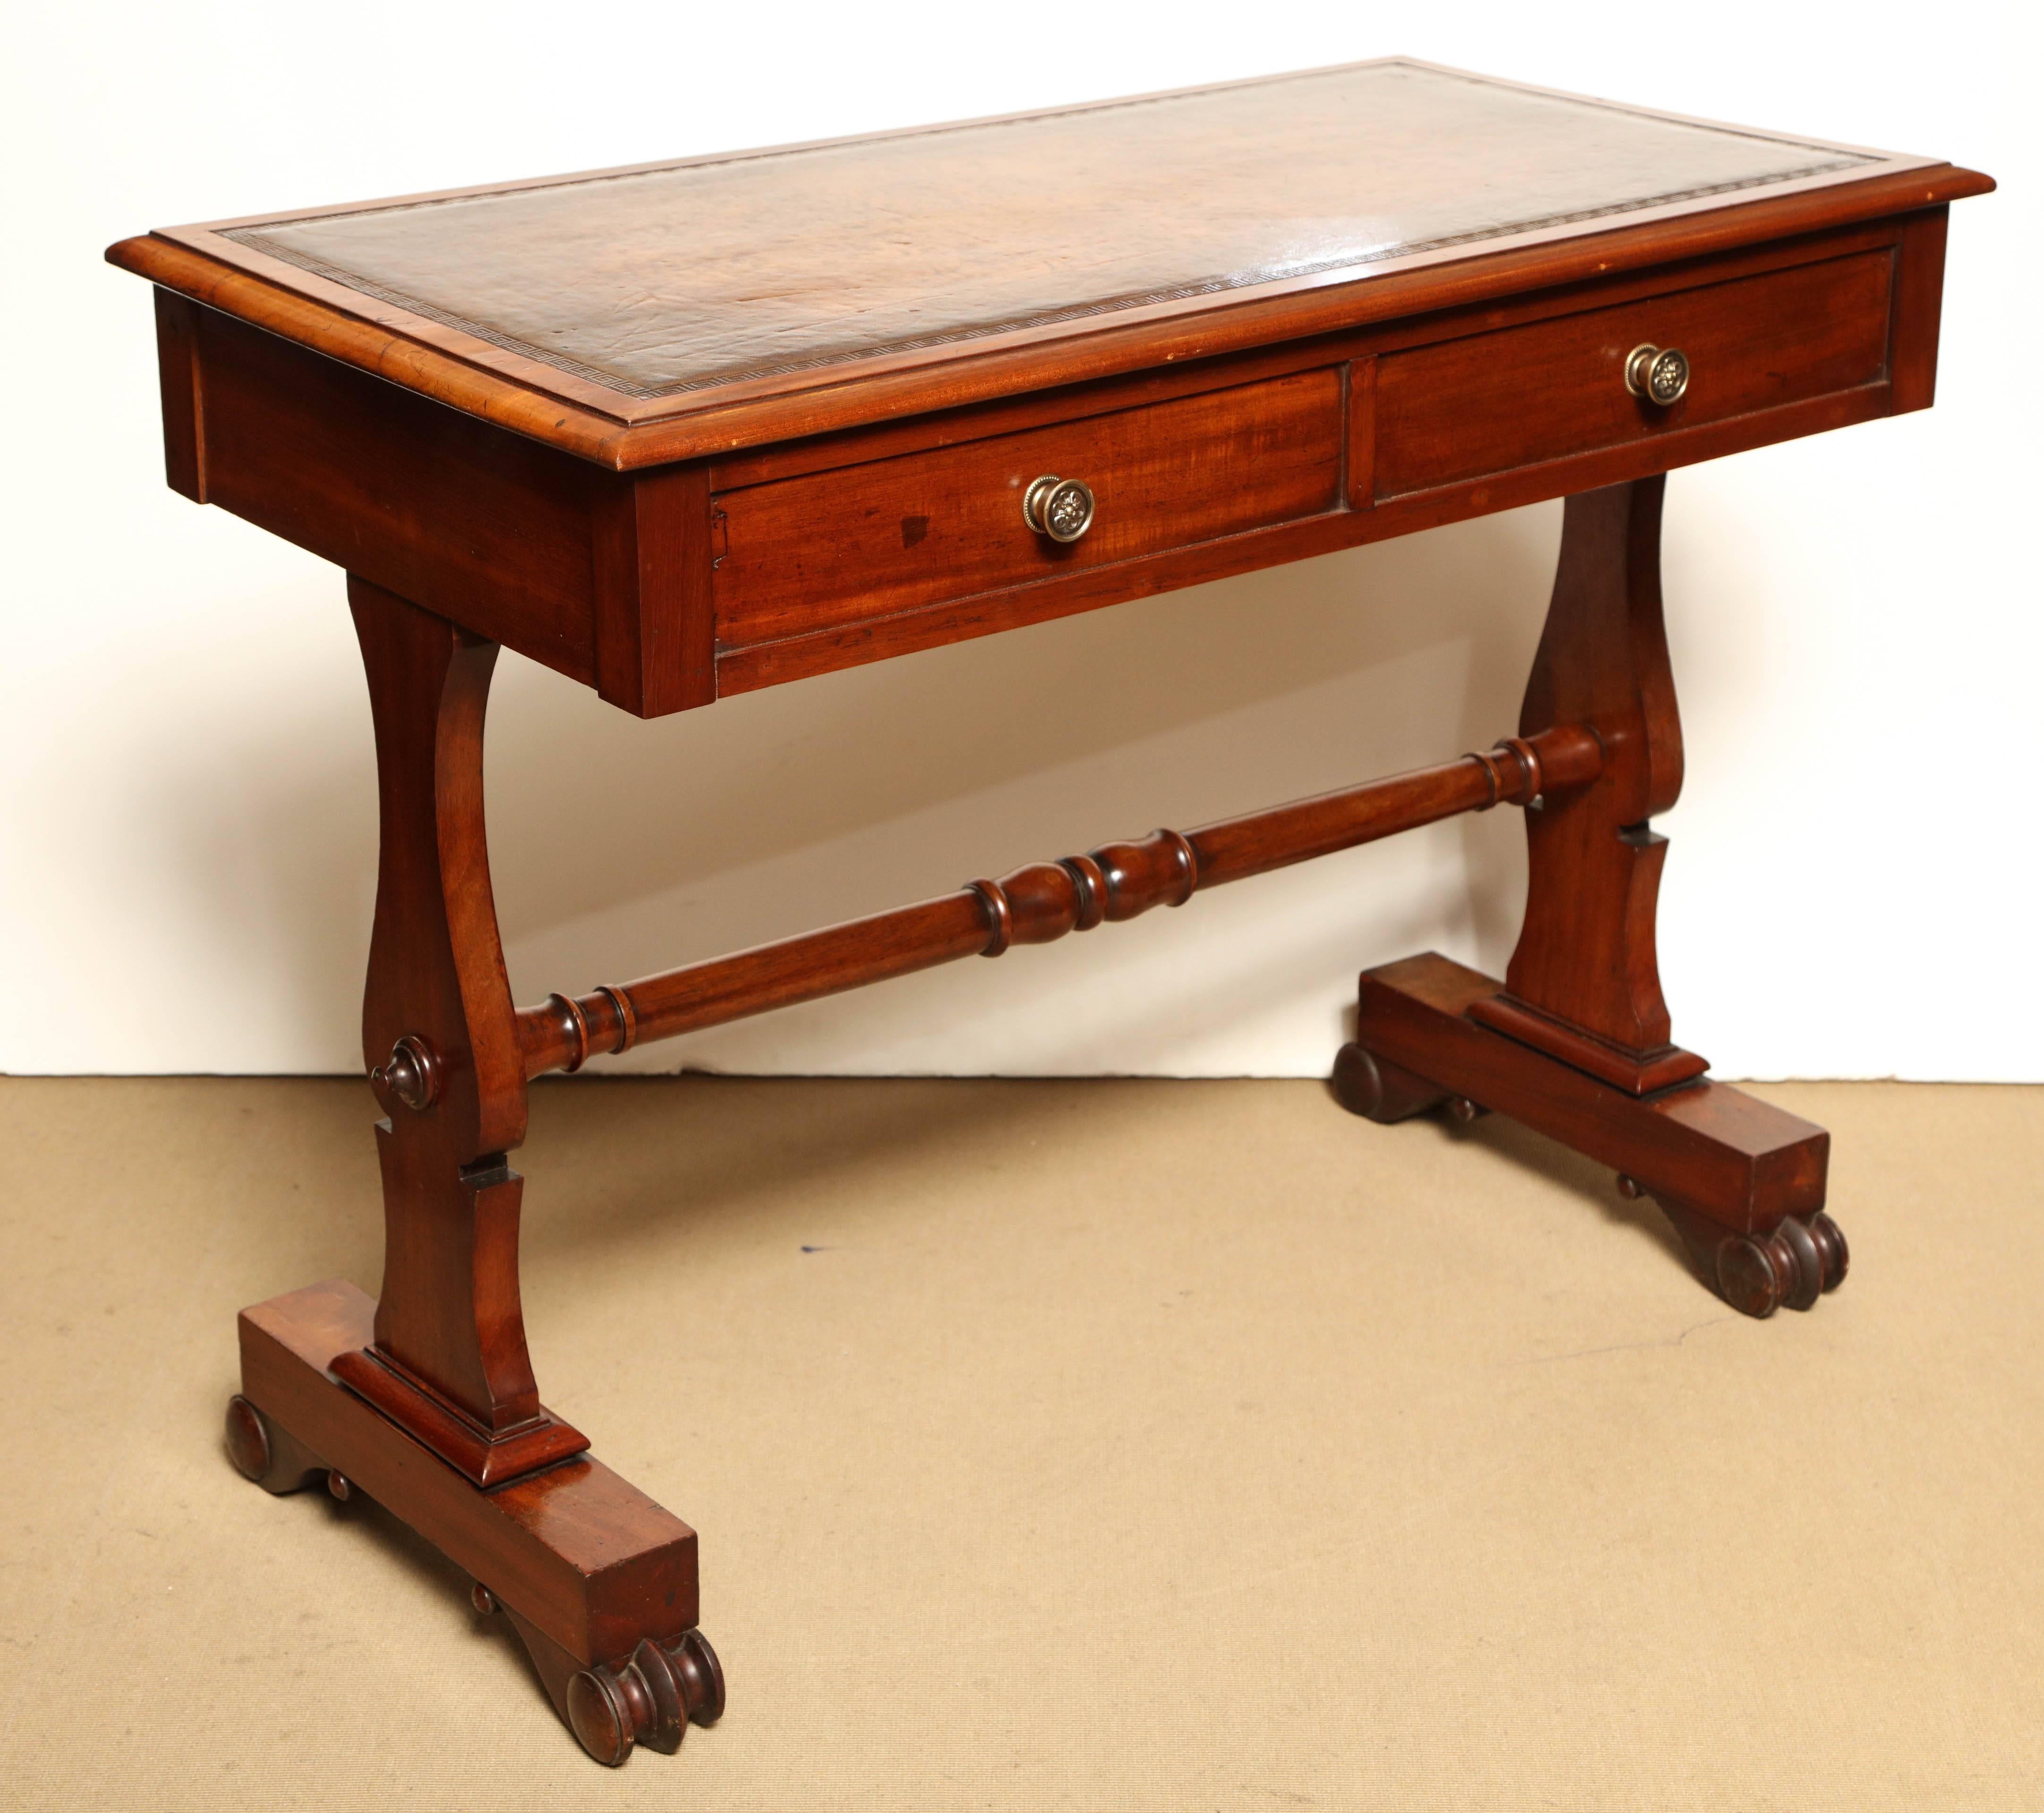 Mid-19th Century English, Mahogany and Leather Top Desk 6